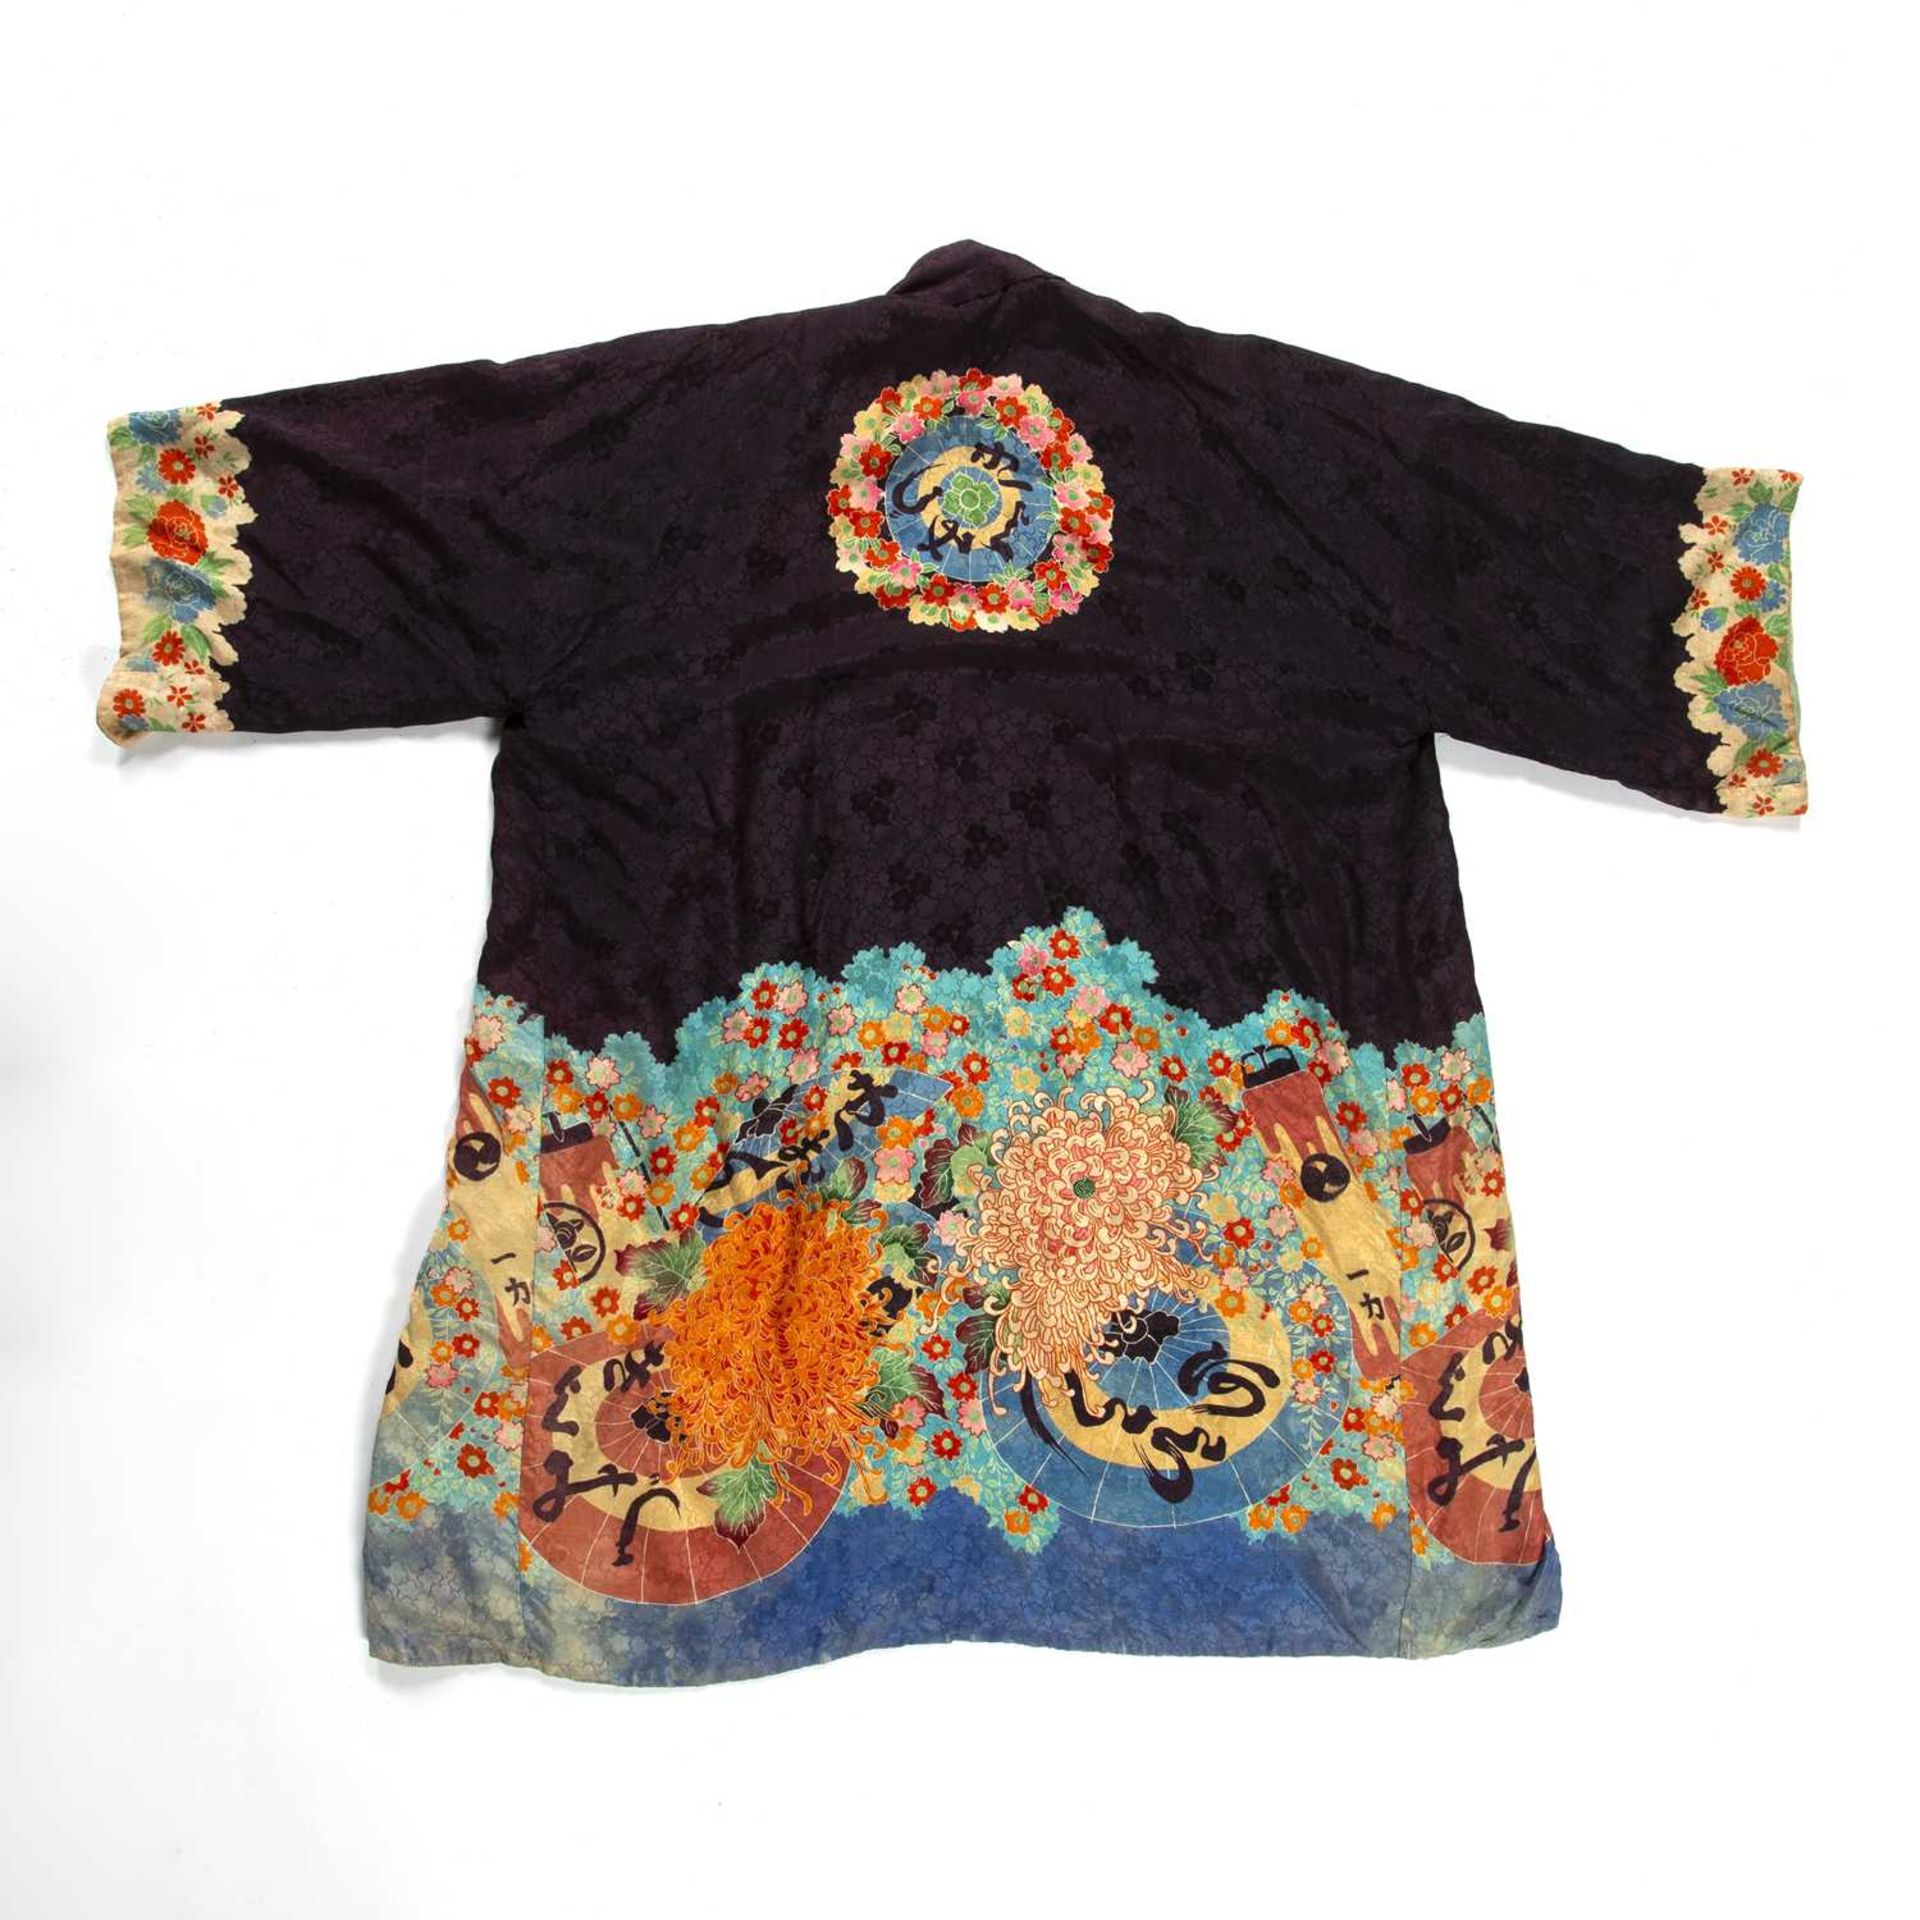 Haori jacket or coat Japanese, Late 19th/early 20th Century printed silk pattern with blue silk